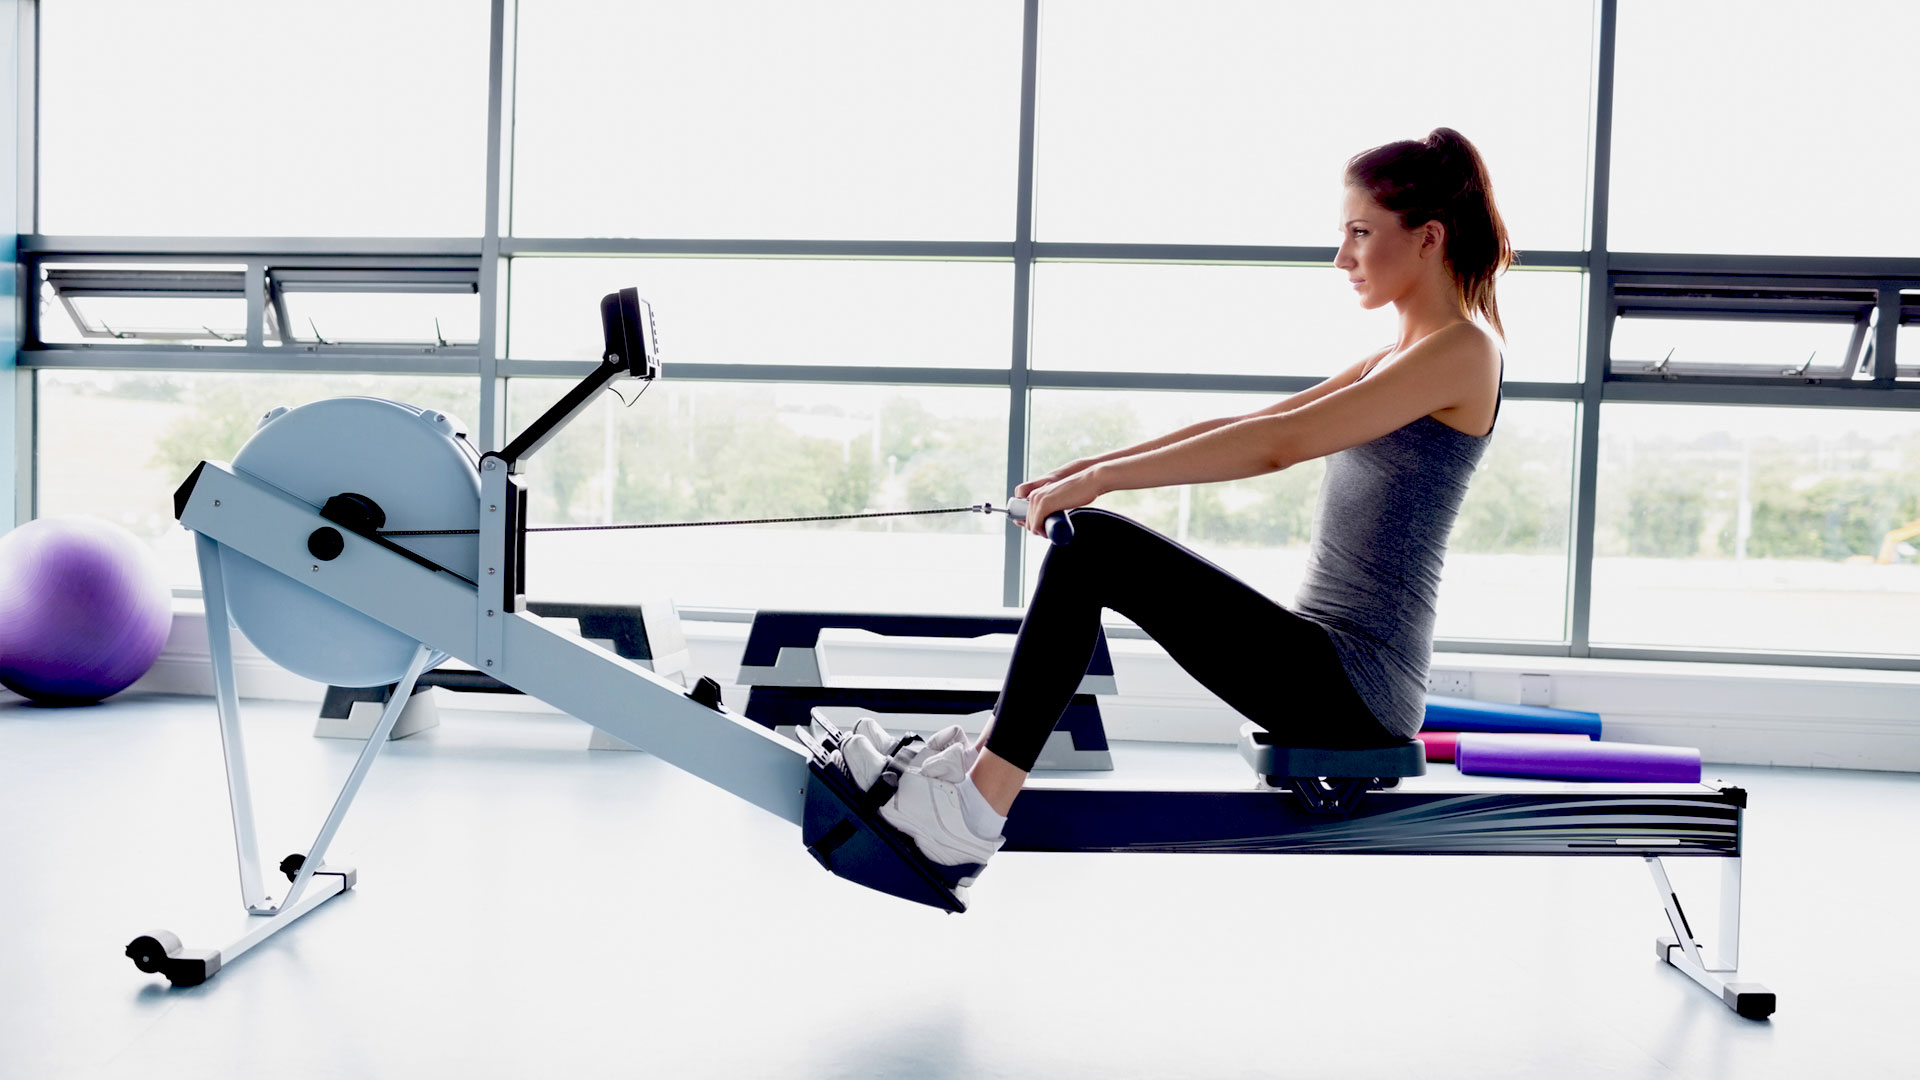 A woman uses a rowing machine